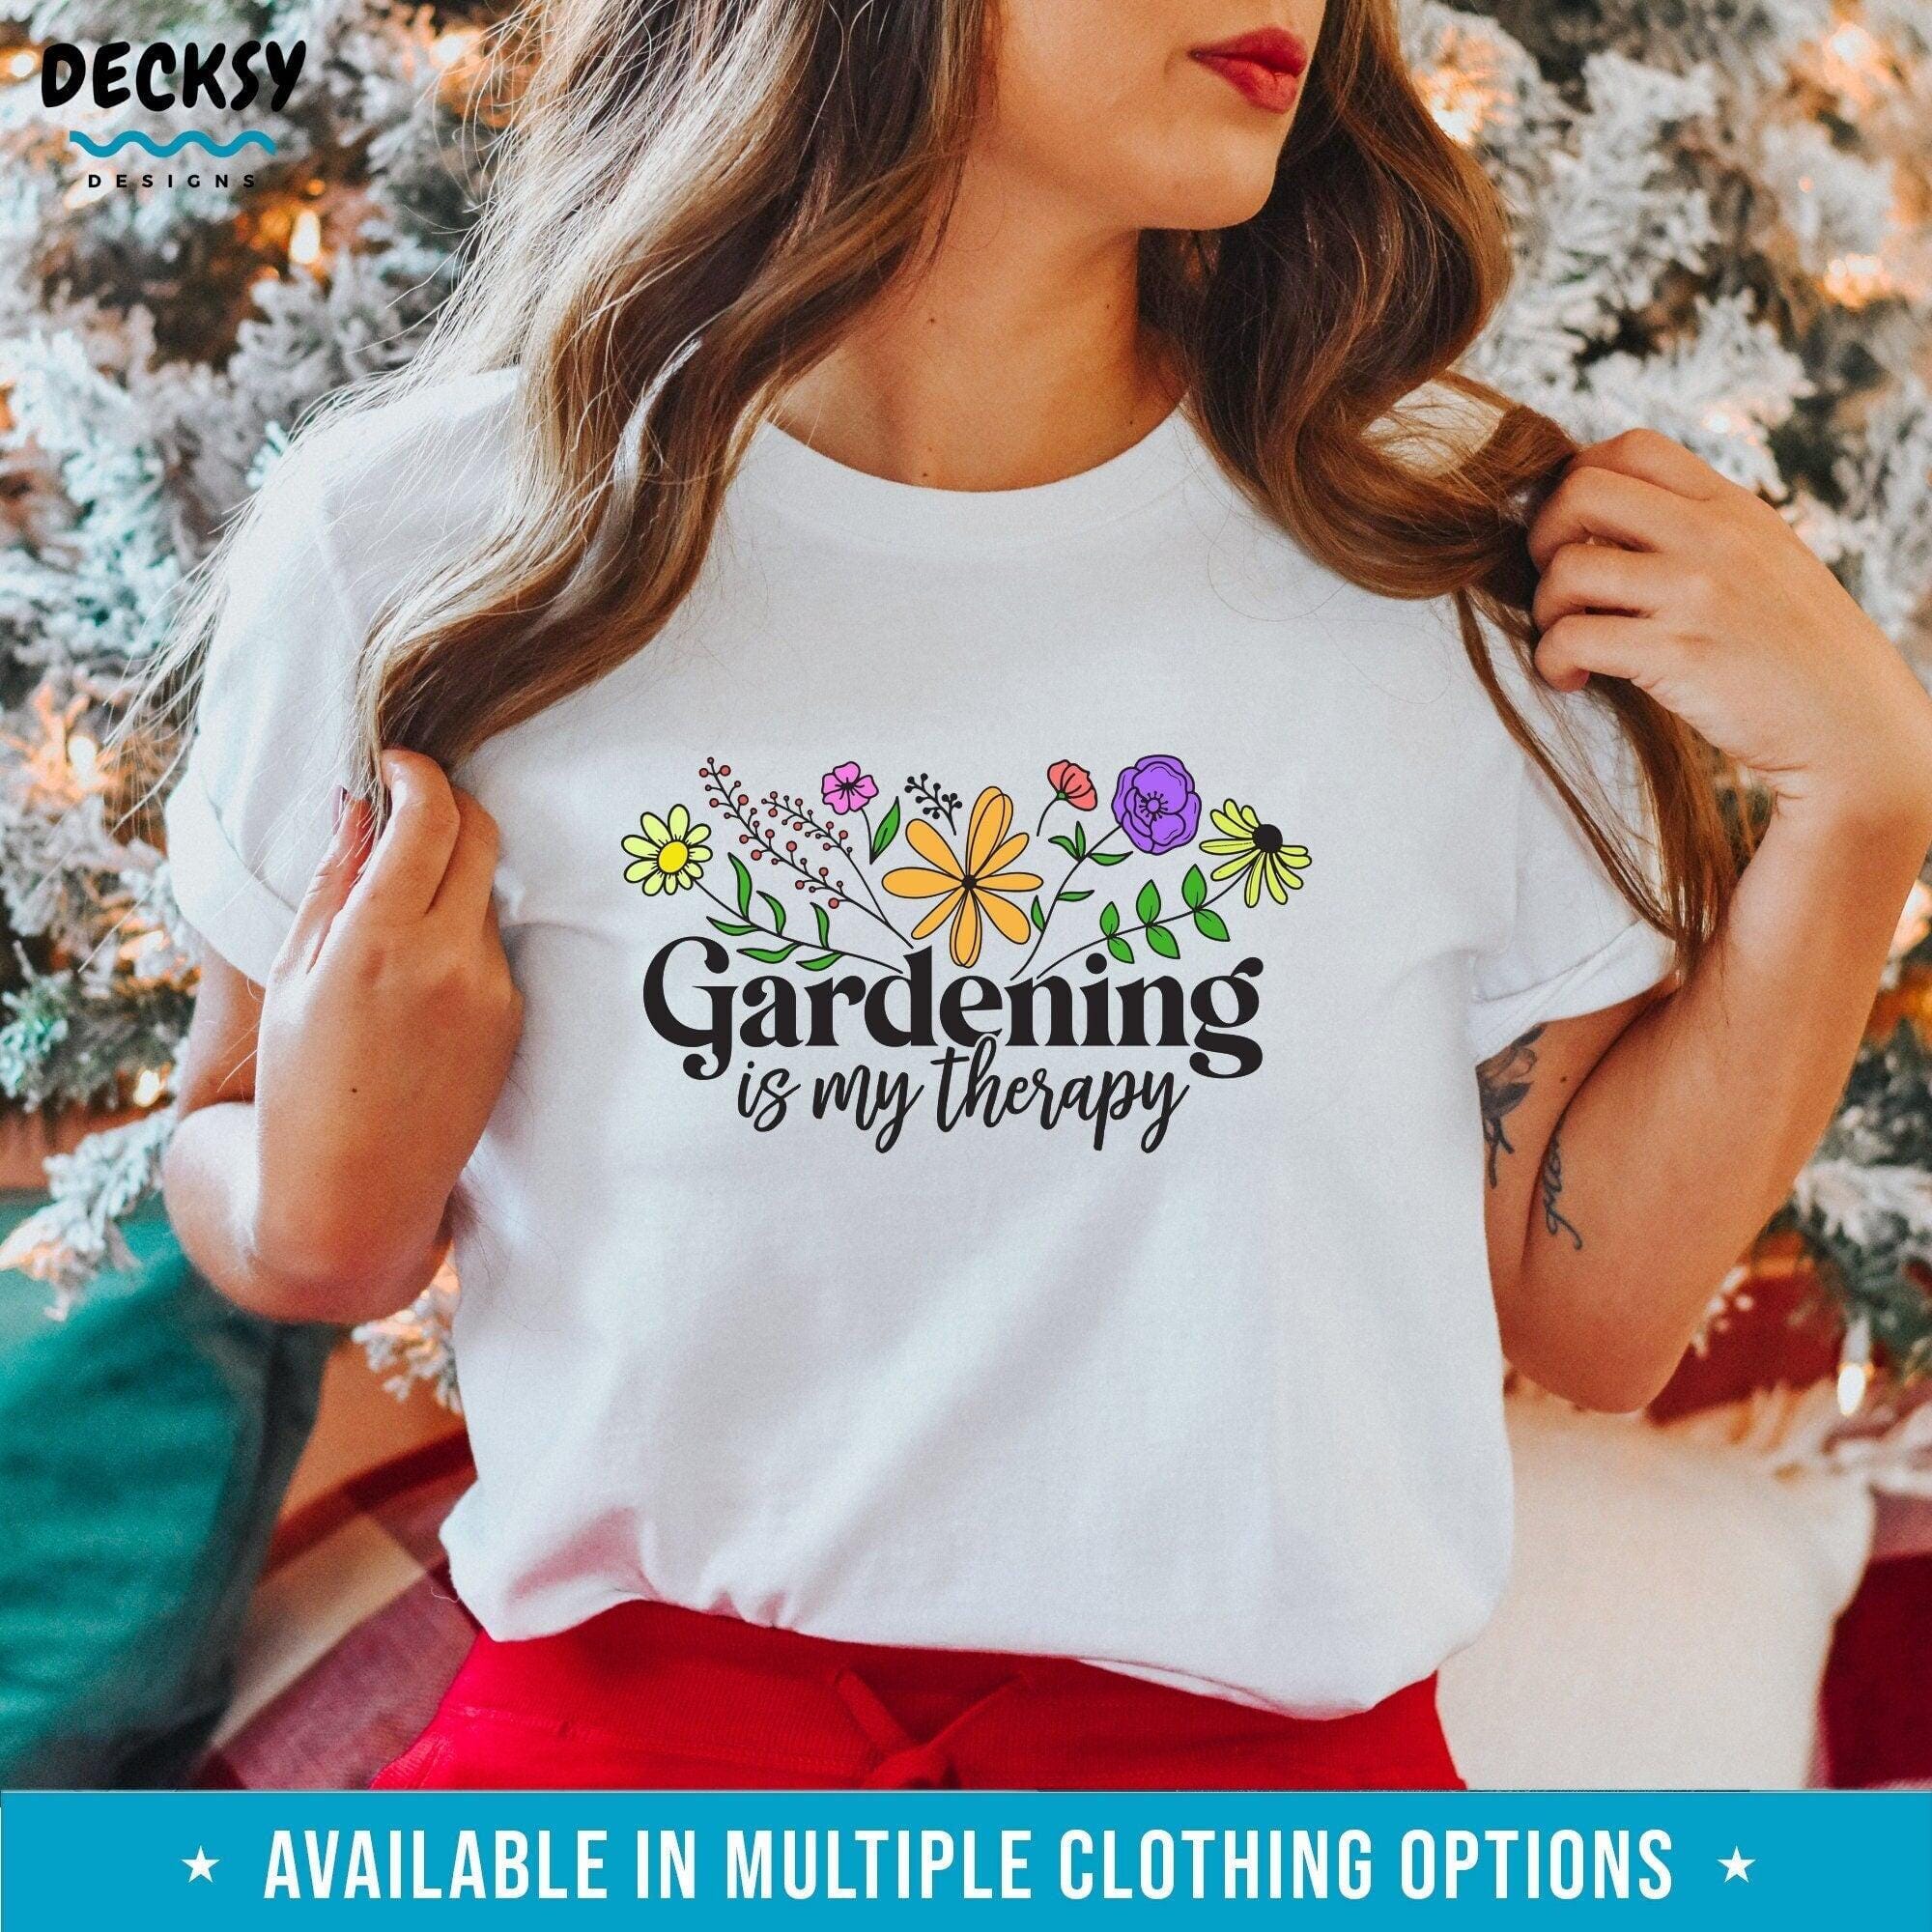 Plant Lover Shirt, Funny Gift For Gardeners-Clothing:Gender-Neutral Adult Clothing:Tops & Tees:T-shirts:Graphic Tees-DecksyDesigns